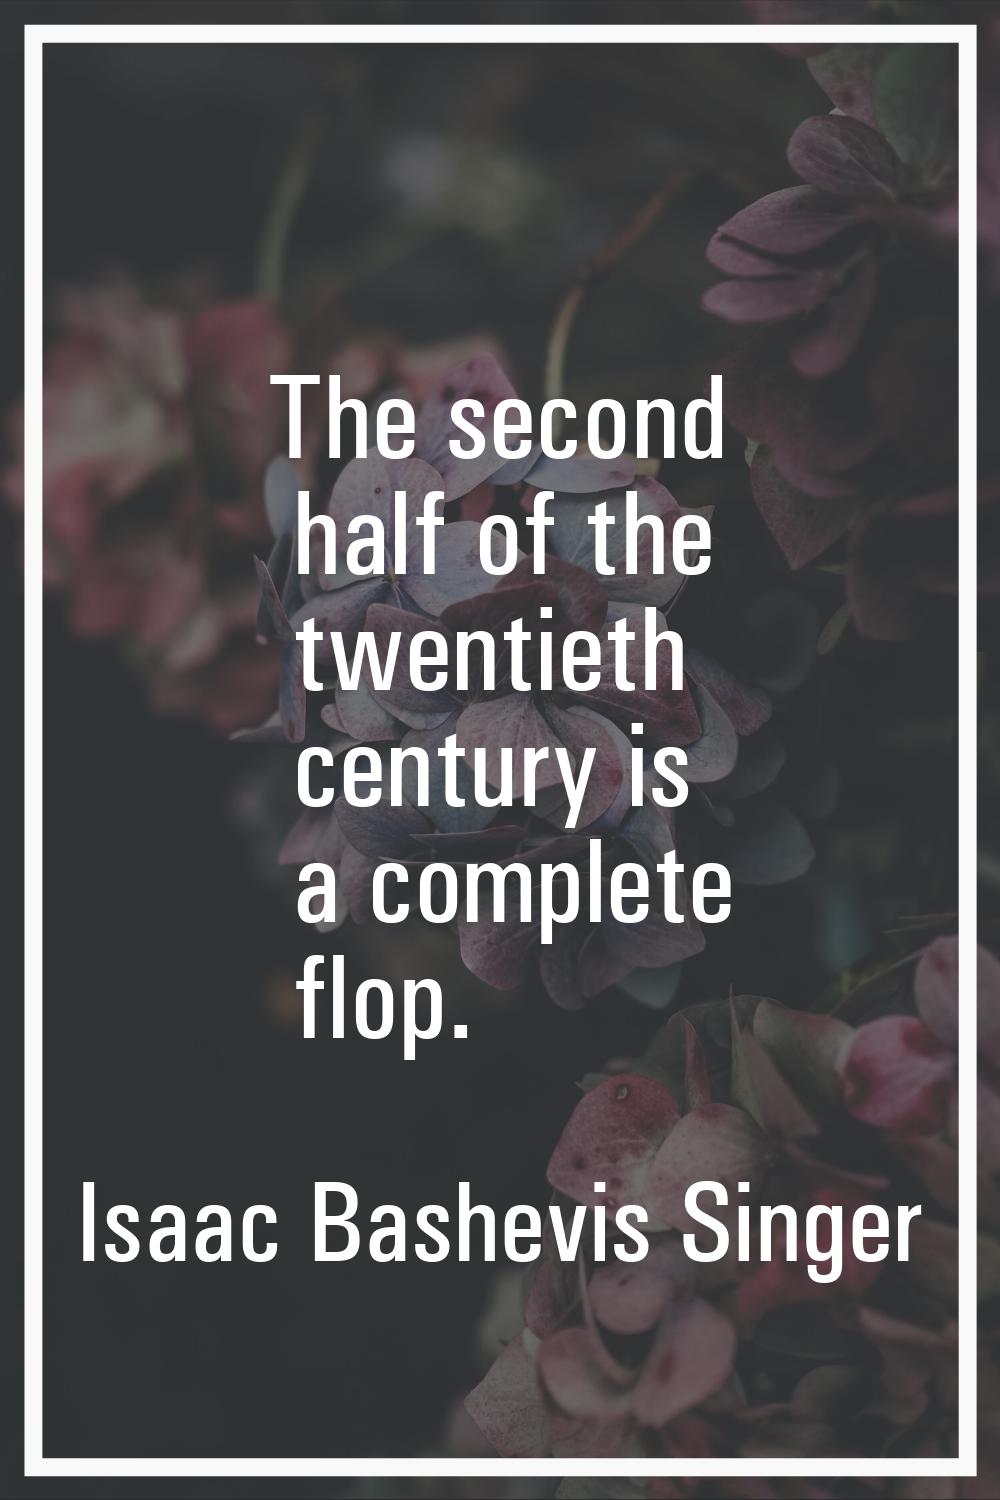 The second half of the twentieth century is a complete flop.